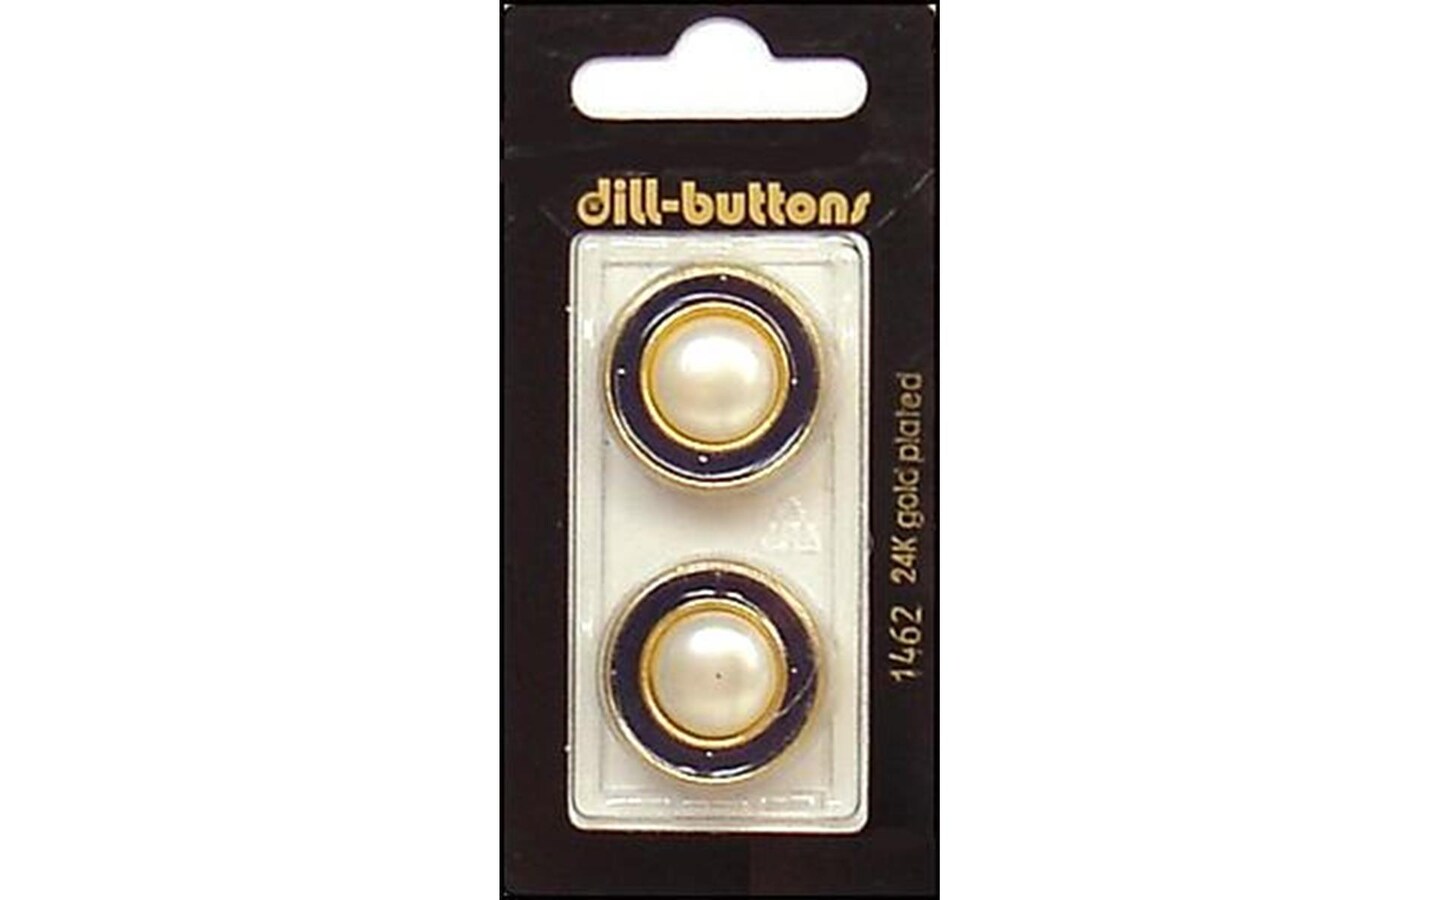 1/2 PRICE BUTTON SALE. Small Round and Square Buttons in Hot 